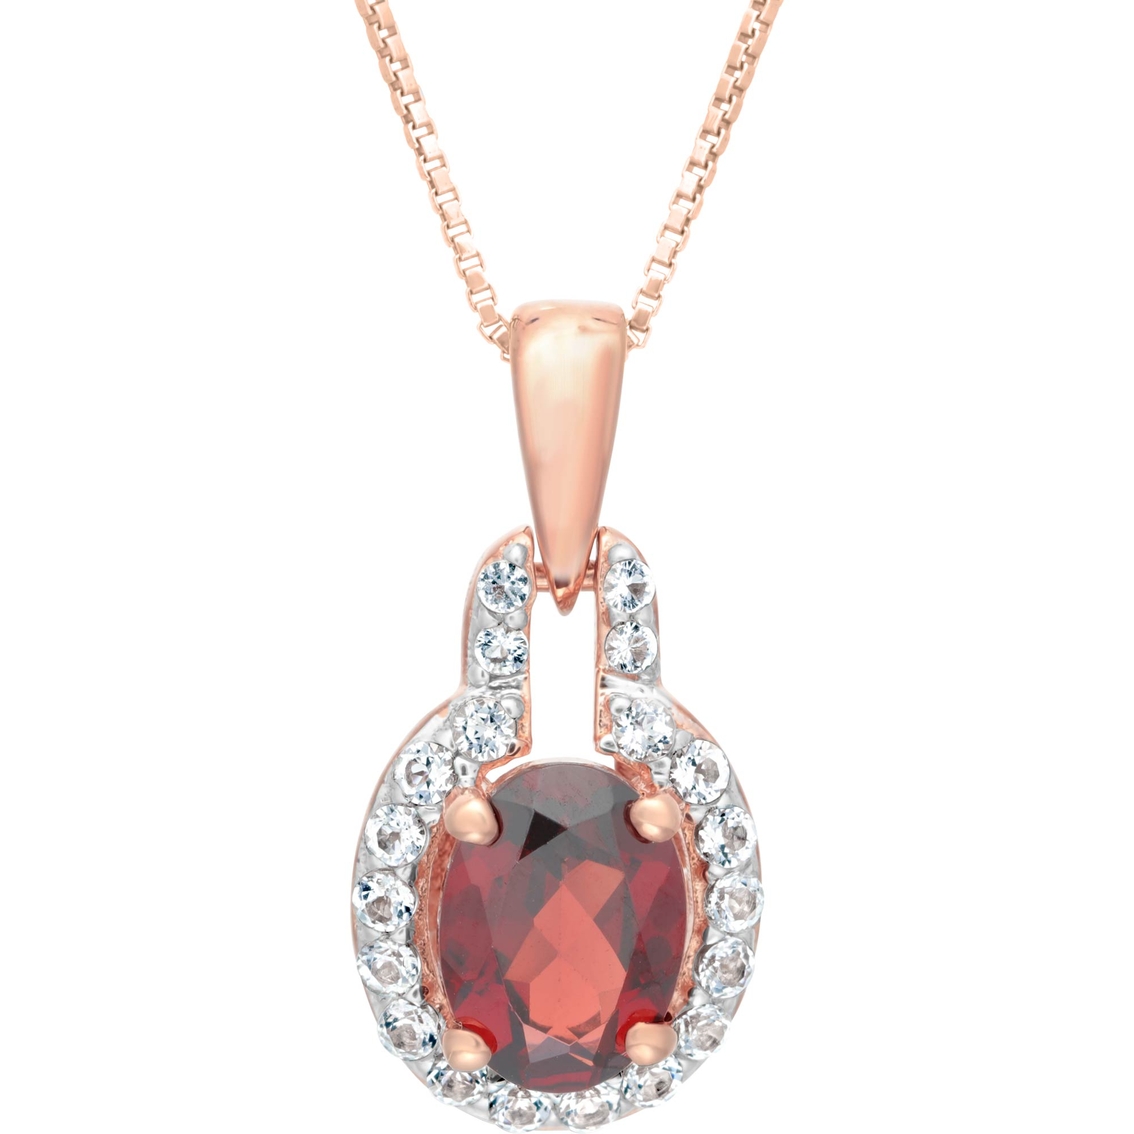 Rose Gold Over Sterling Silver Pendant With Garnet And White Topaz | Gemstone Necklaces ...